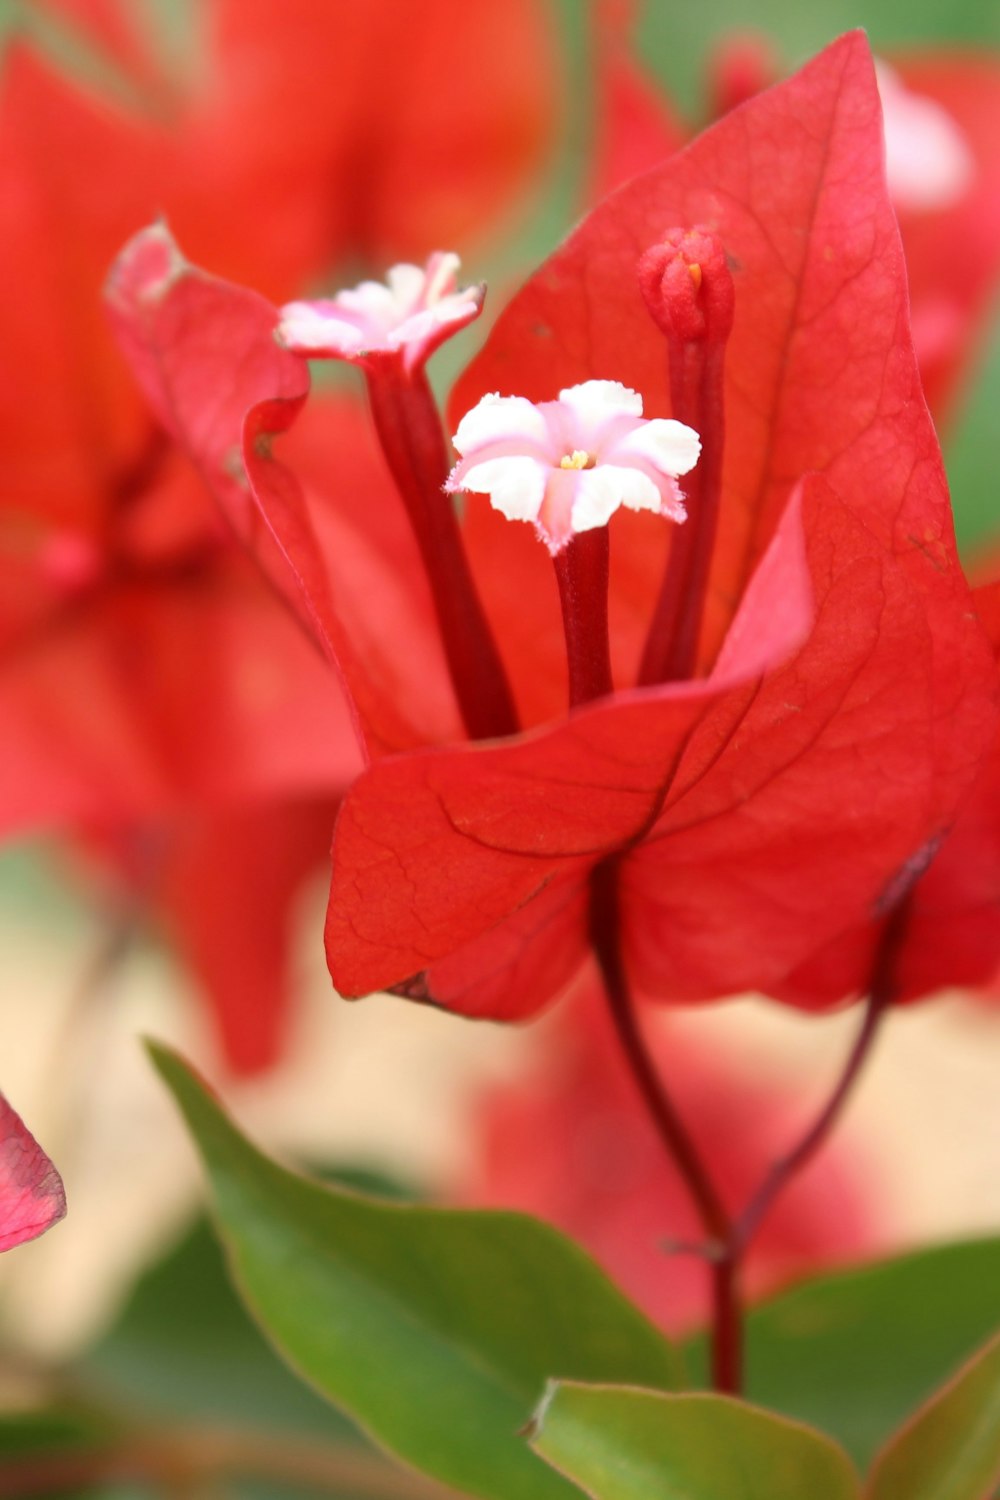 close-up photography of red and white petaled flowers during daytime